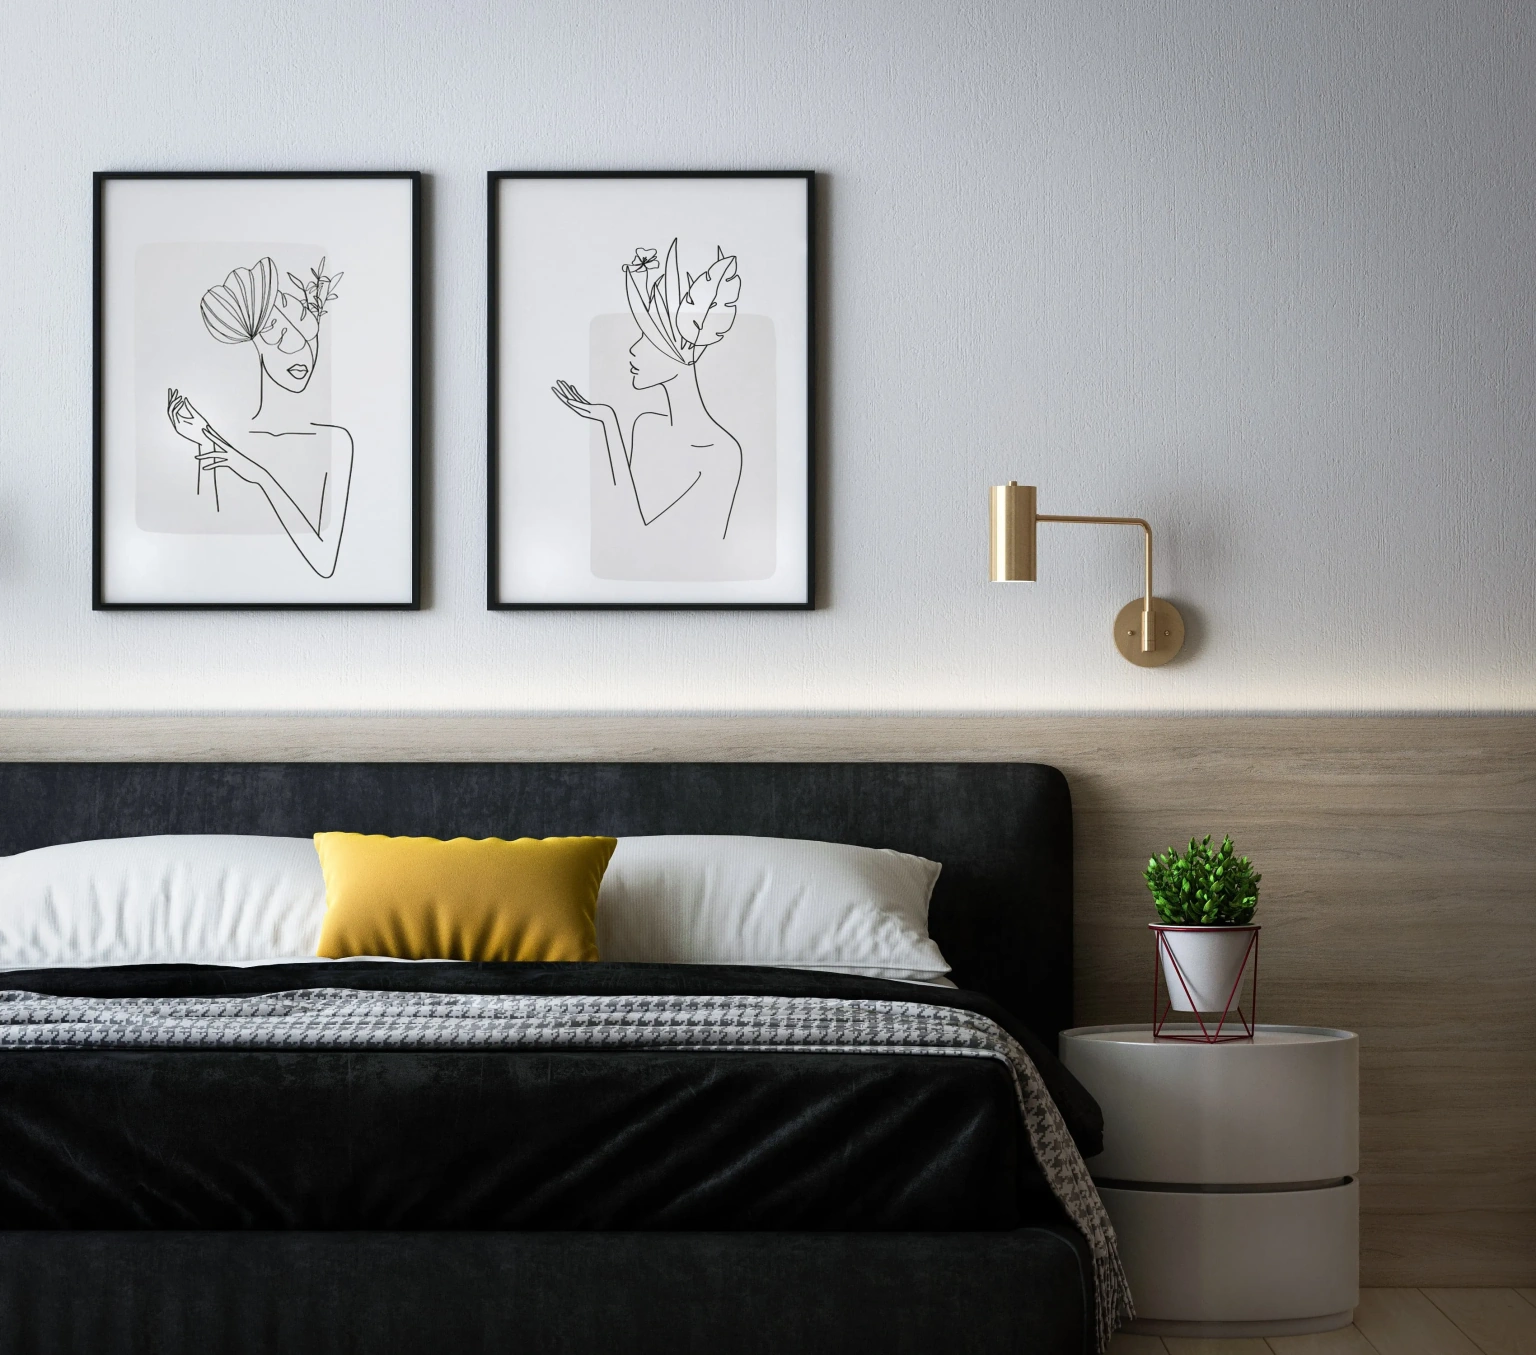 Bedroom interiors with a minimalist drawings on the wall